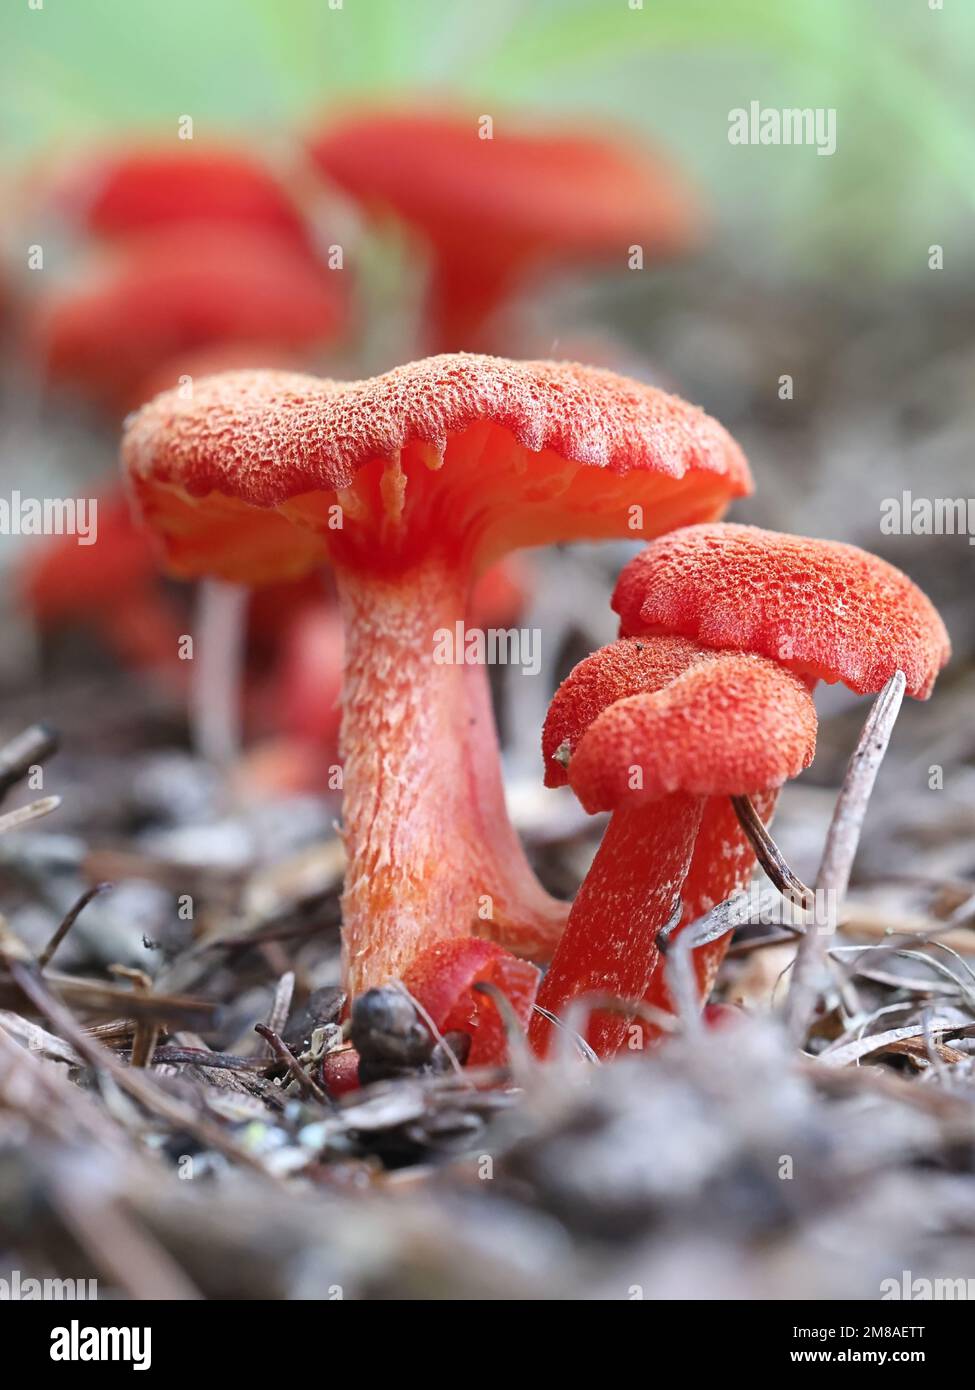 Hygrocybe miniata, also called Hygrophorus miniatus, commonly known as vermilion waxcap, wild mushroom from Finland Stock Photo